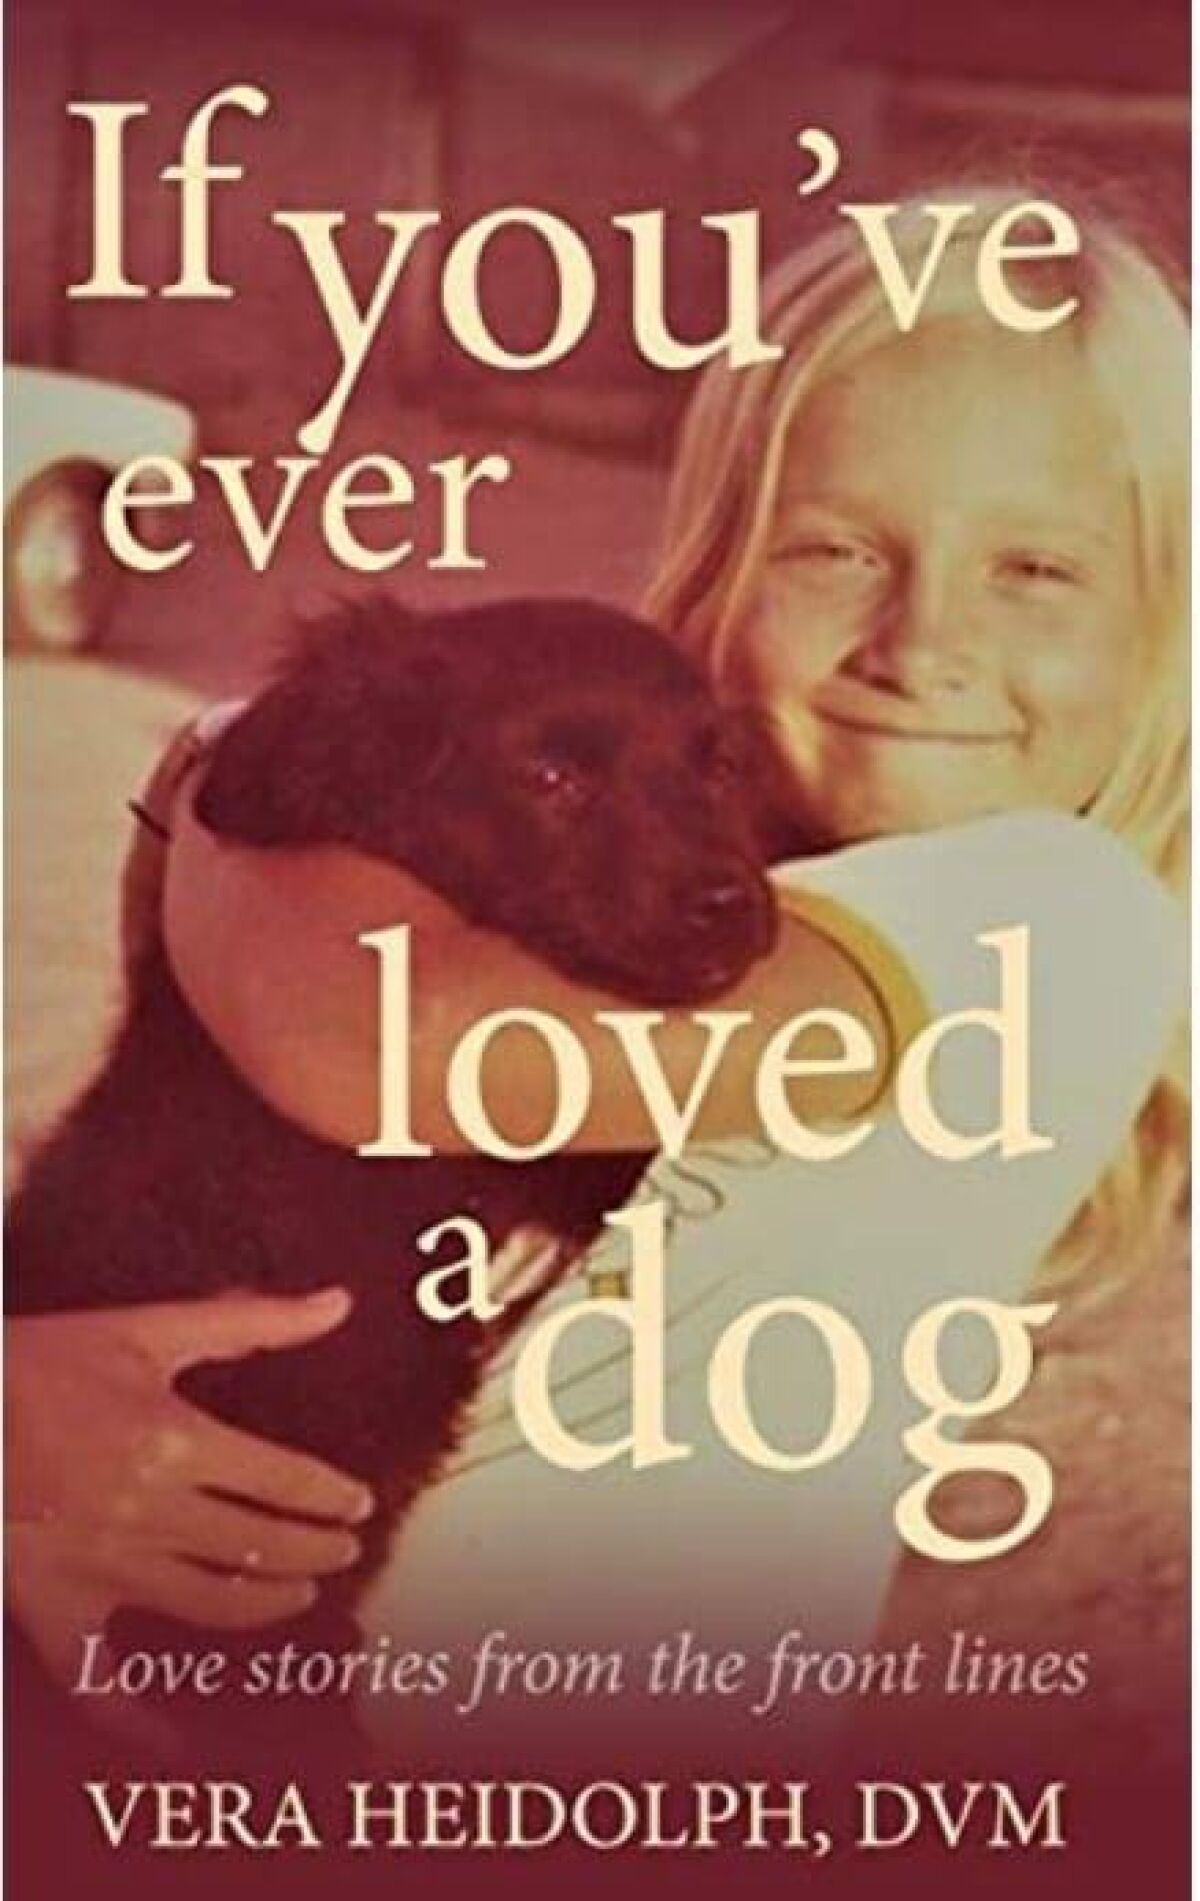 Heidolph's book contains a series of vignettes about her dogs and other stories.